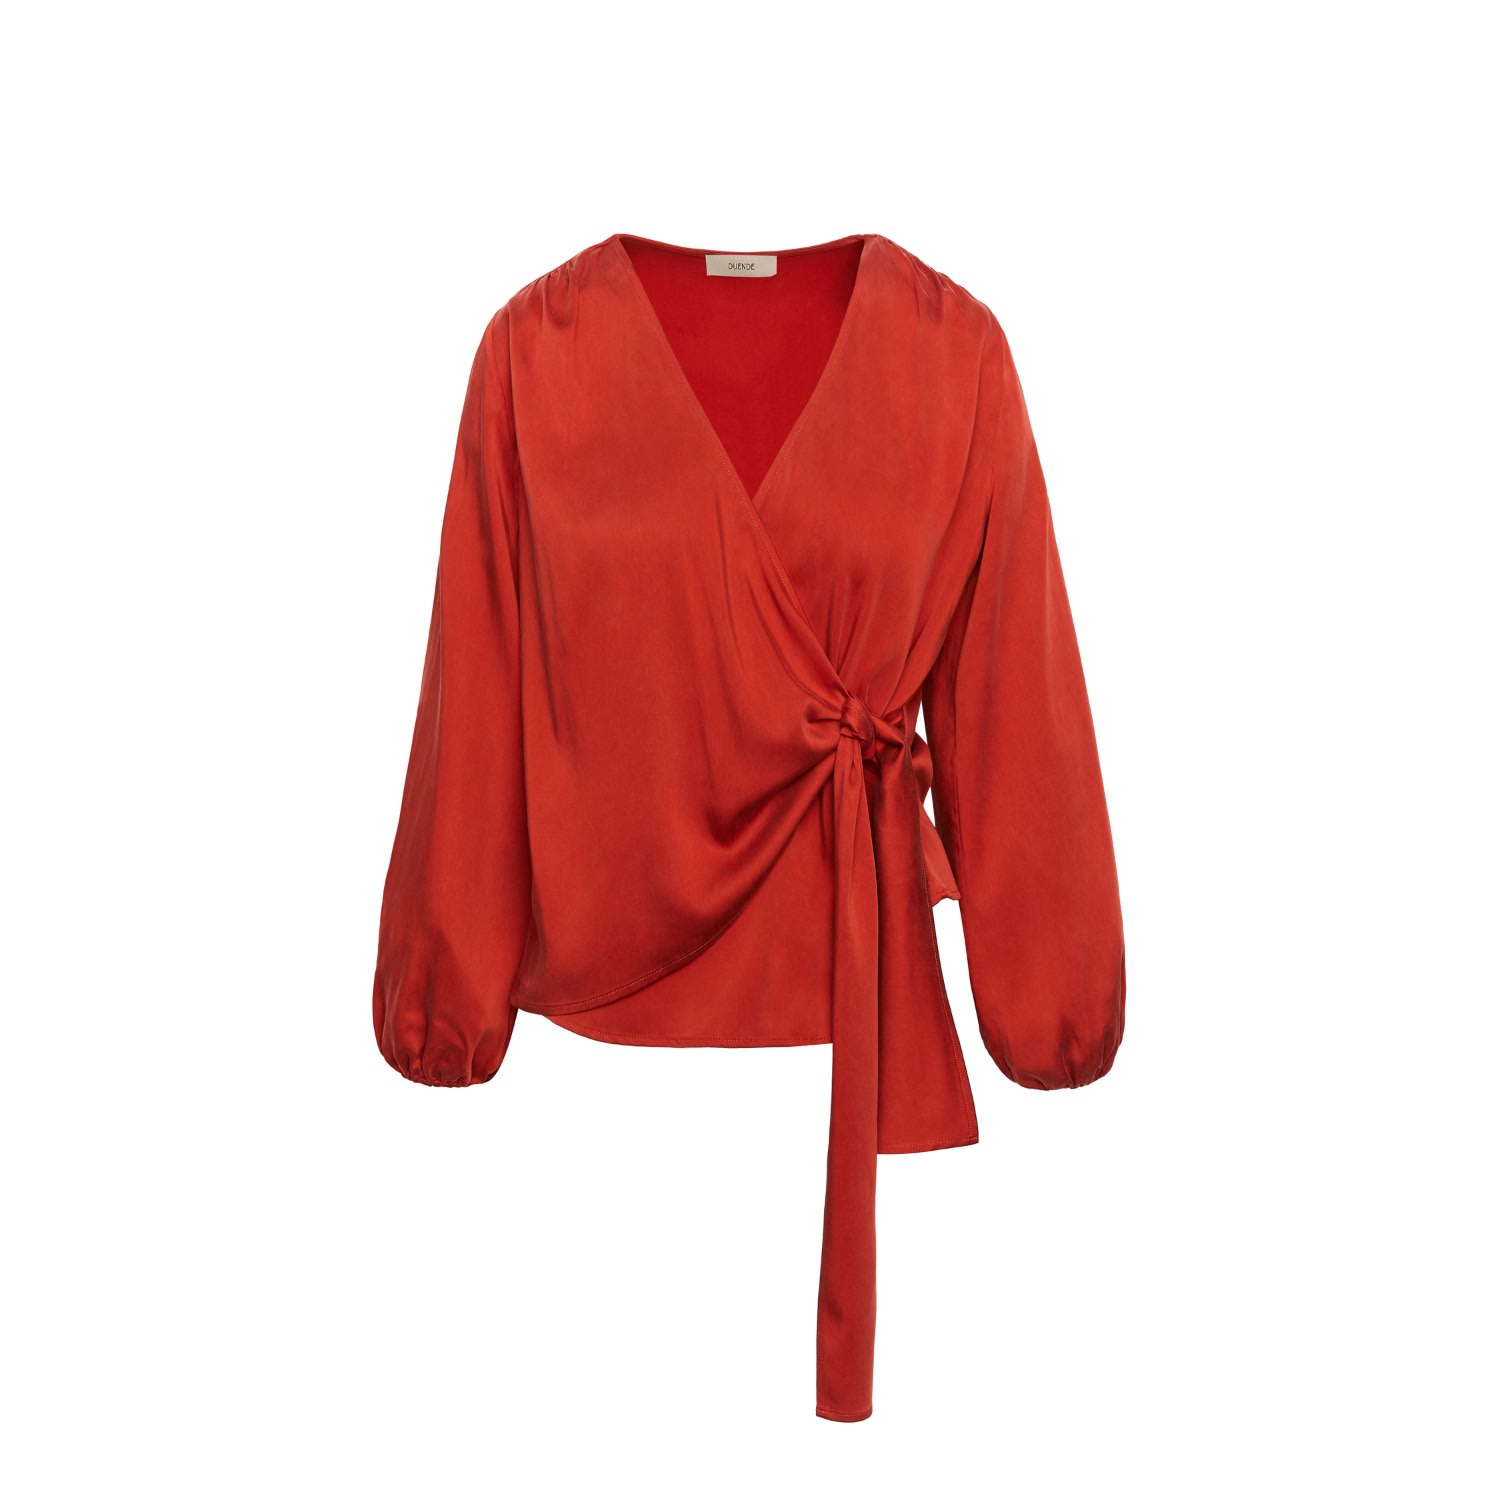 Women’s Aire Blouse - Red M/L Duende